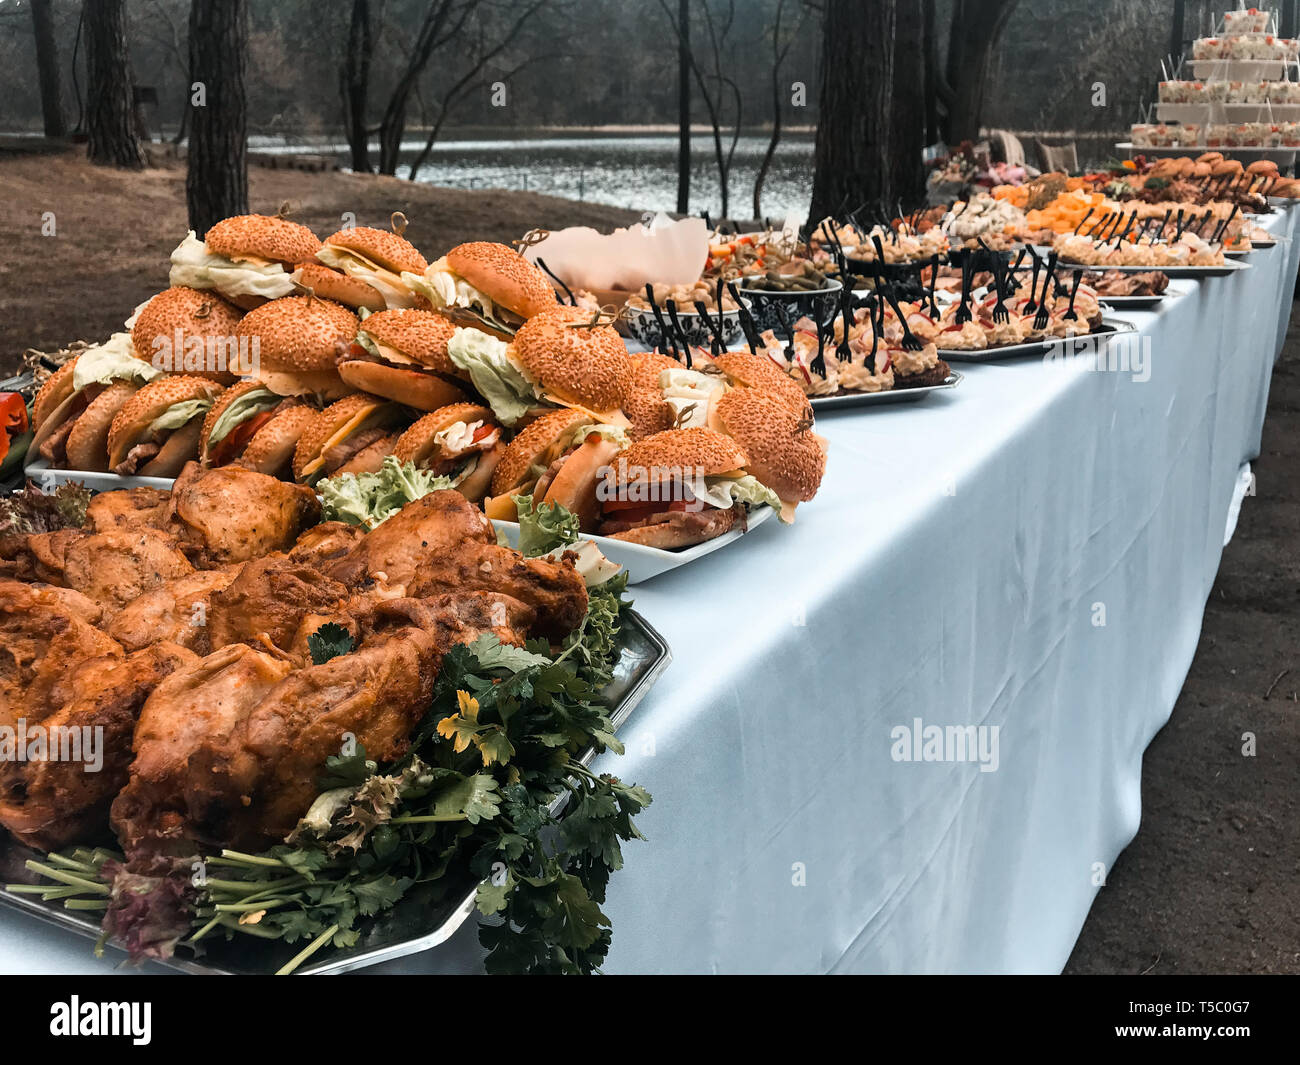 Row of stainless hotel pans on food warmers. Warm vegetable as side dishes.  Self-service buffet table. Celebration, party, birthday or wedding concept  Stock Photo - Alamy